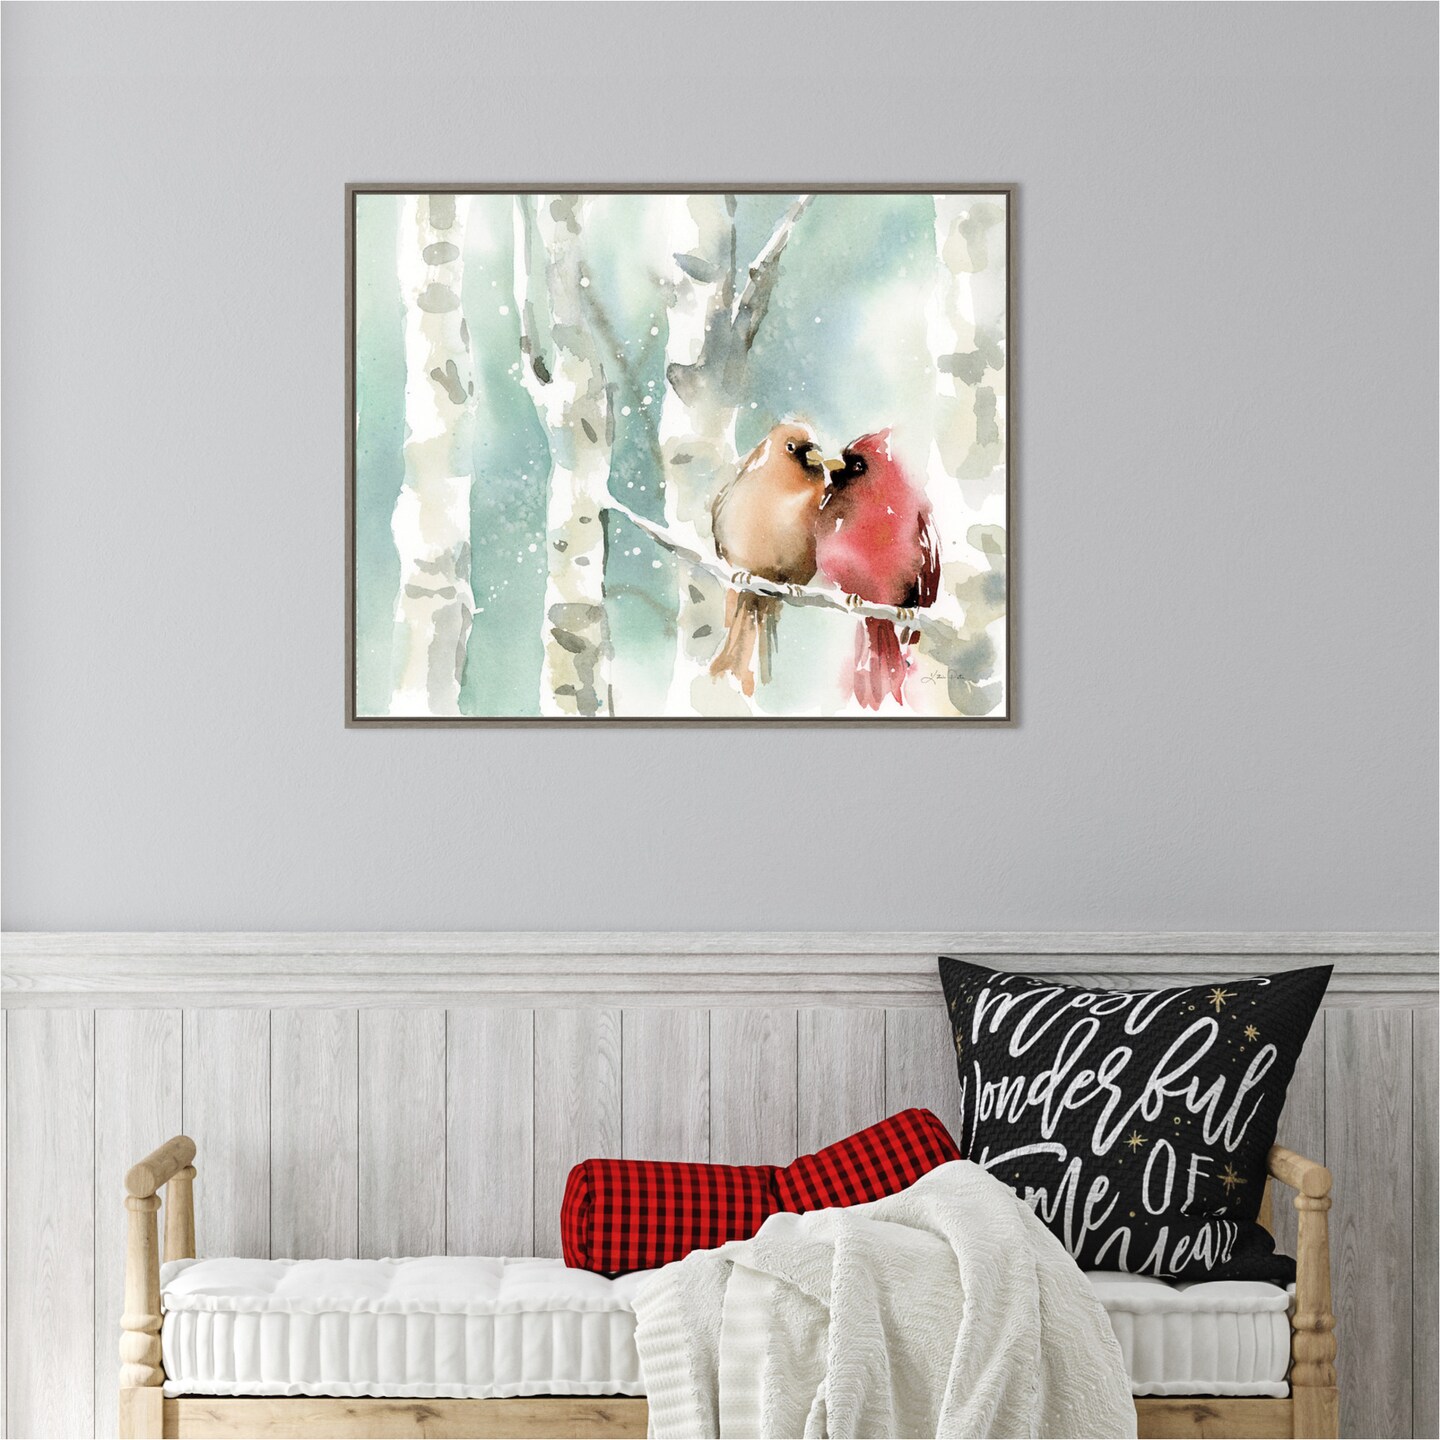 Christmas Cardinals by Katrina Pete 28-in. W x 23-in. H. Canvas Wall Art Print Framed in Grey